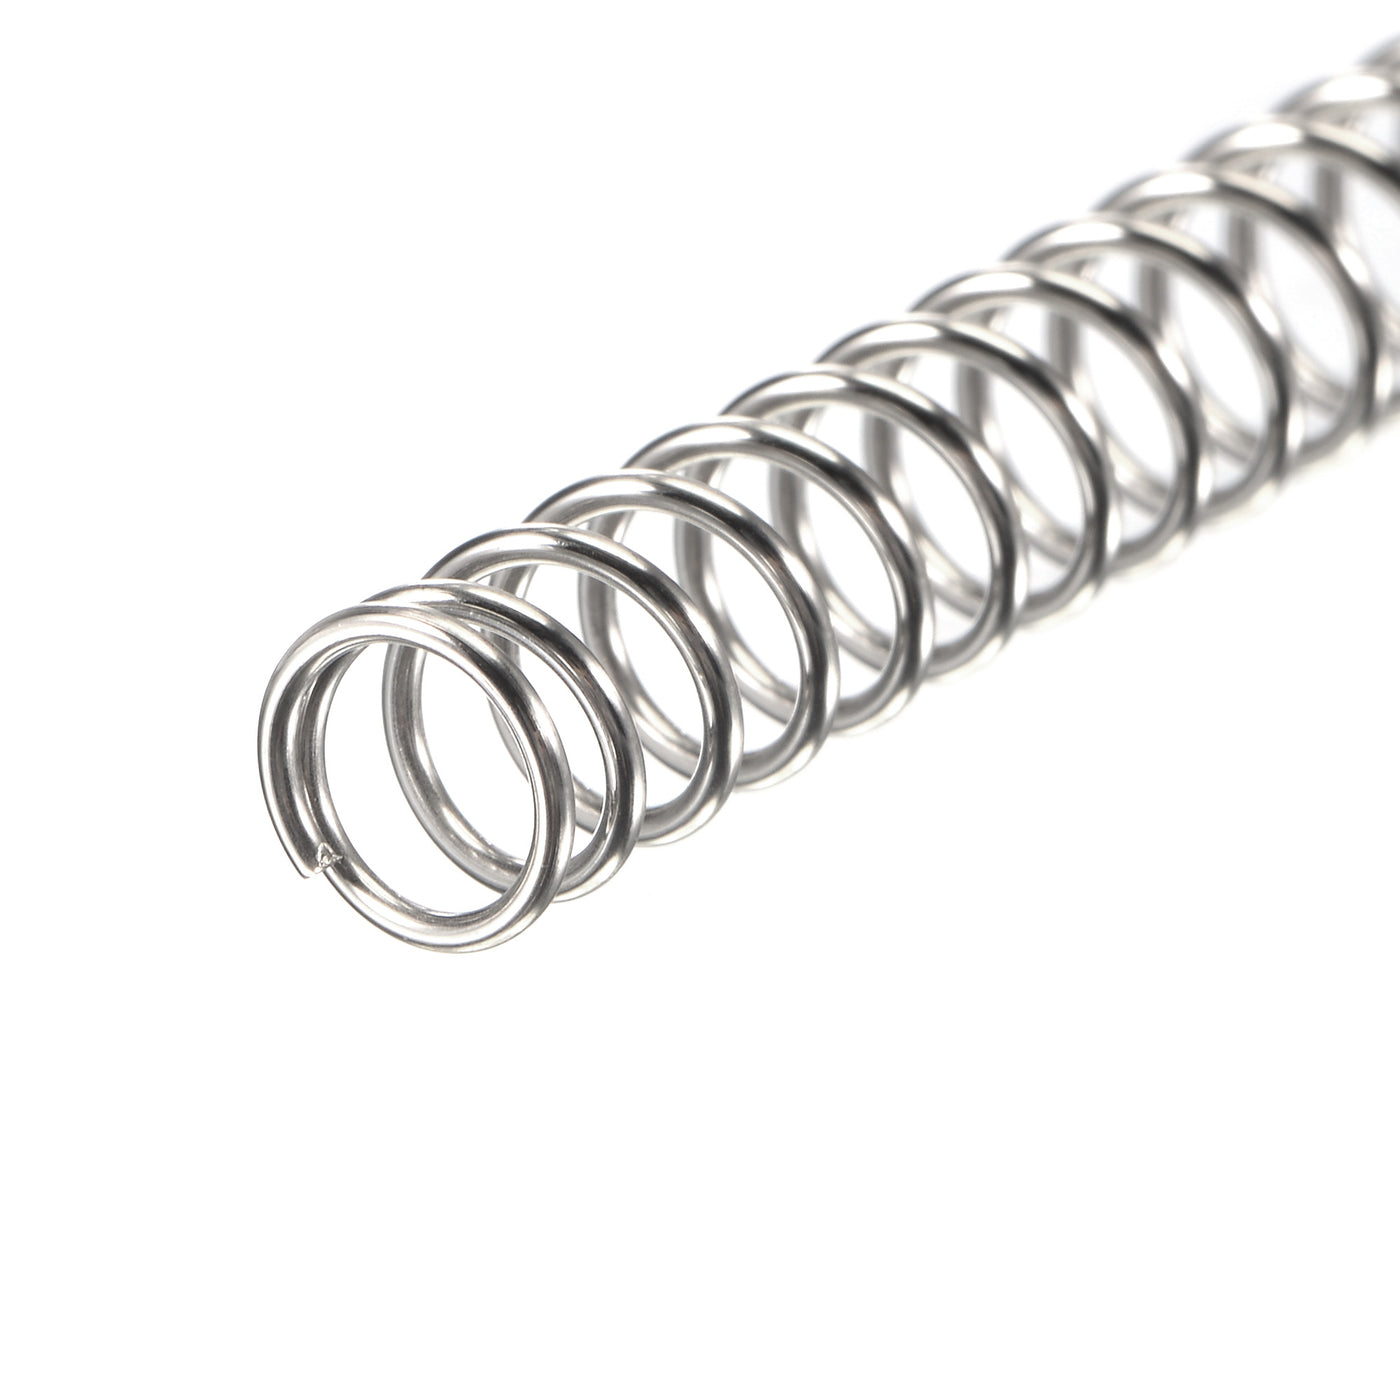 uxcell Uxcell 7mmx0.8mmx45mm 304 Stainless Steel Compression Spring 17.2N Load Capacity 30pcs